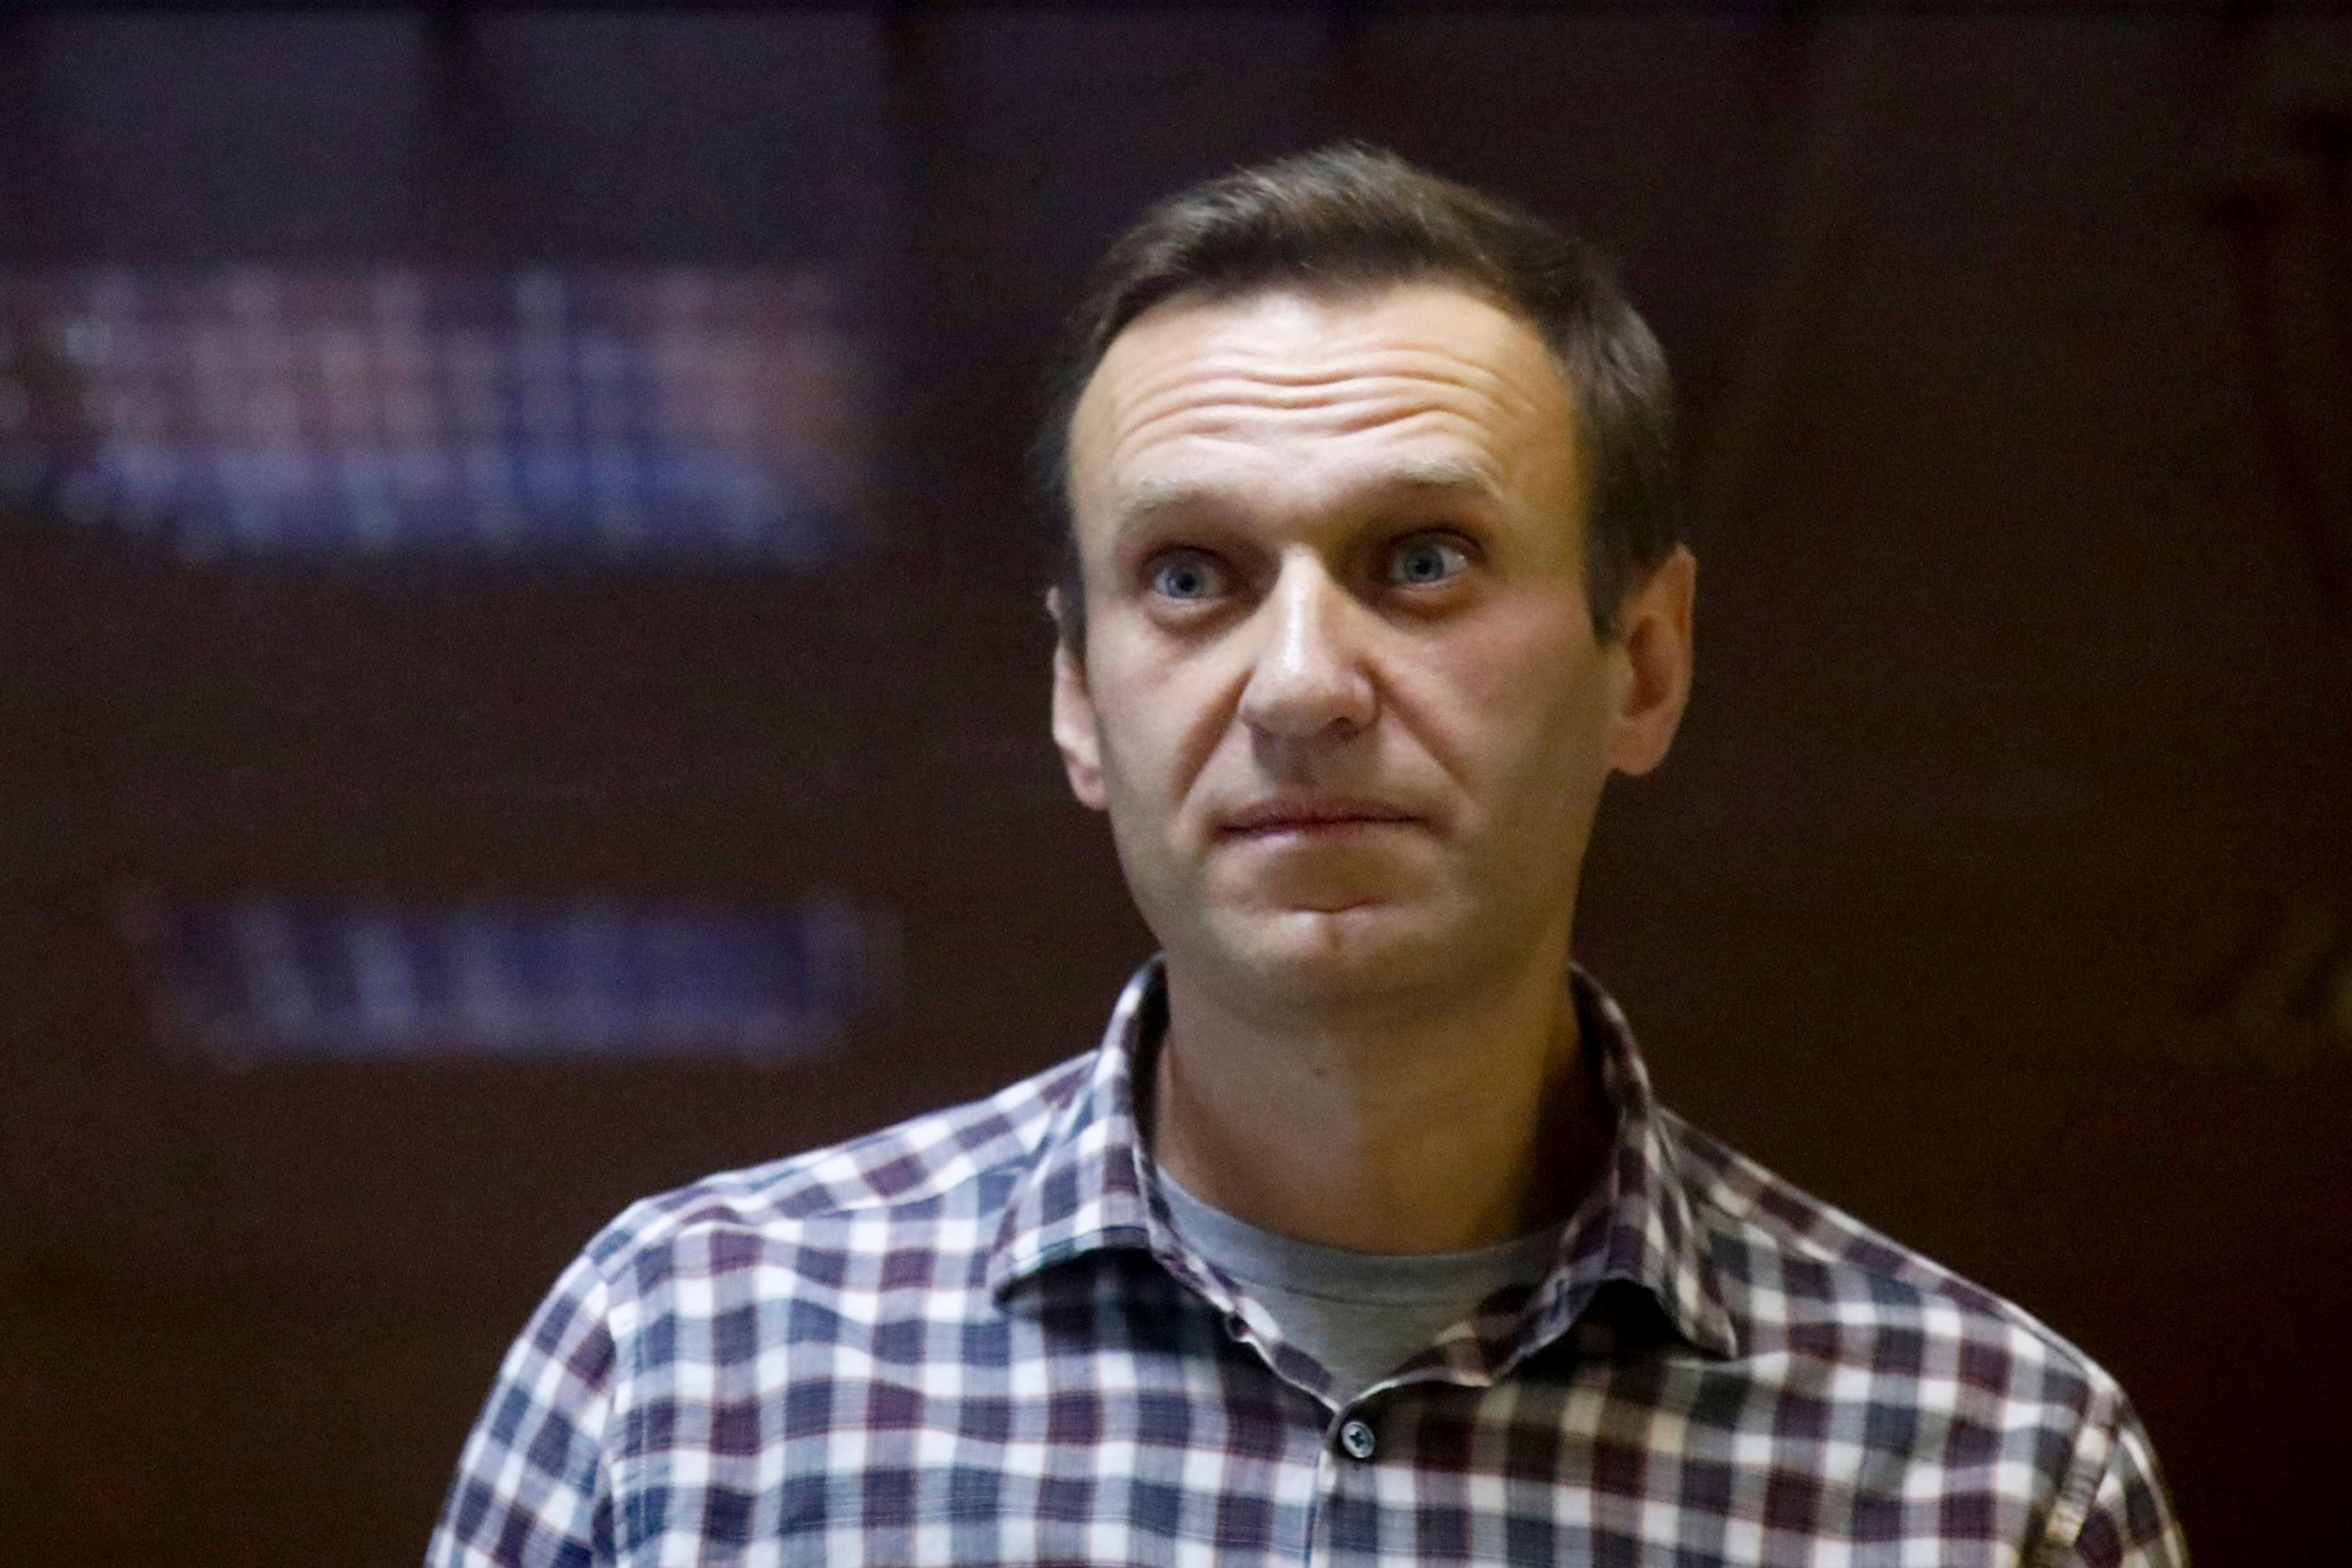 Alexei Navalny: From poisoning to hunger strike